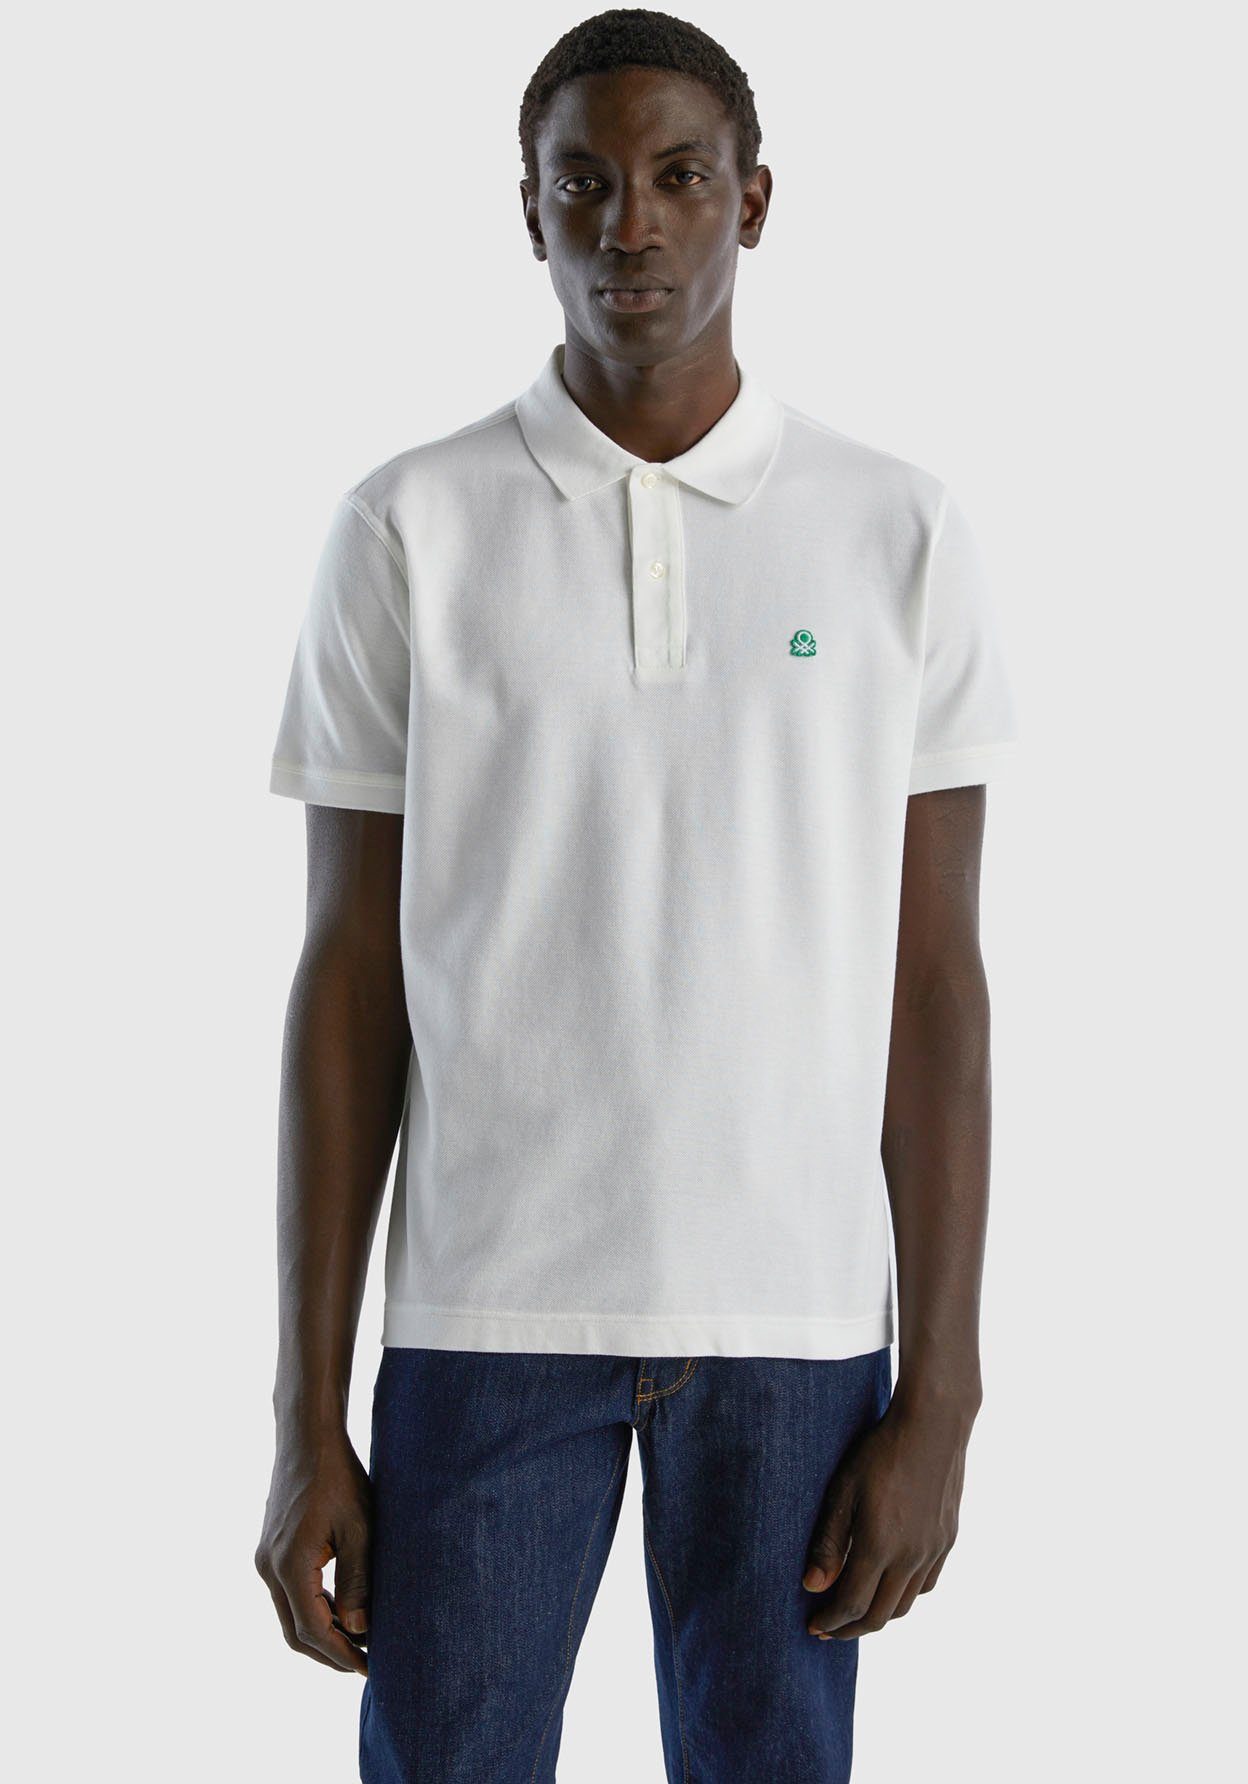 United Colors of Benetton Poloshirt mit Logo in Brusthöhe weiß